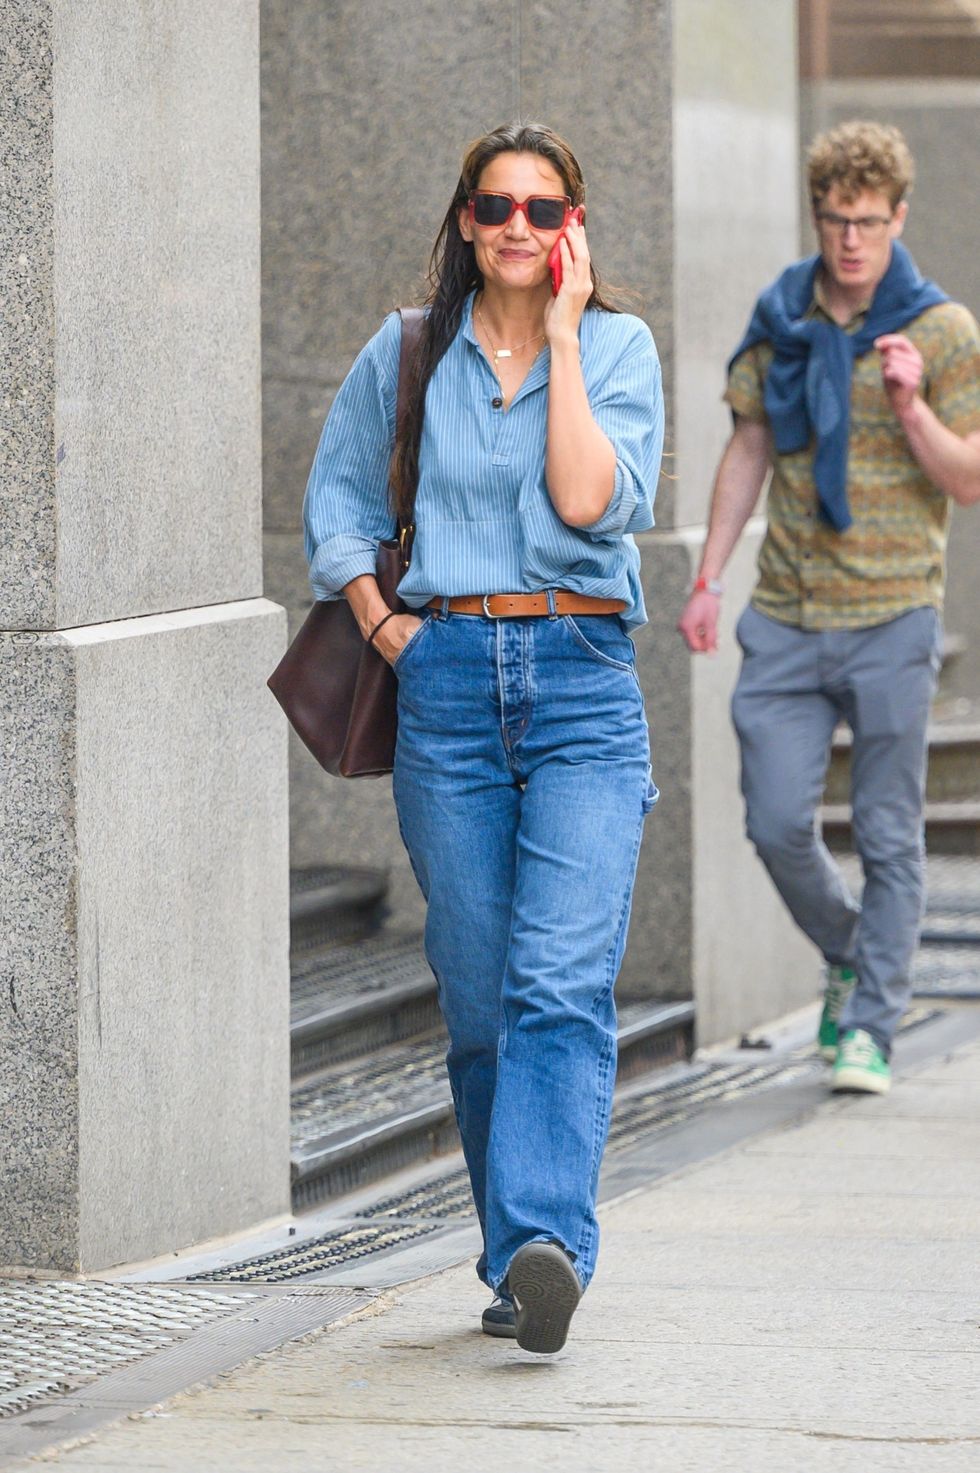 katie holmes wearing denim outfit and brown bag